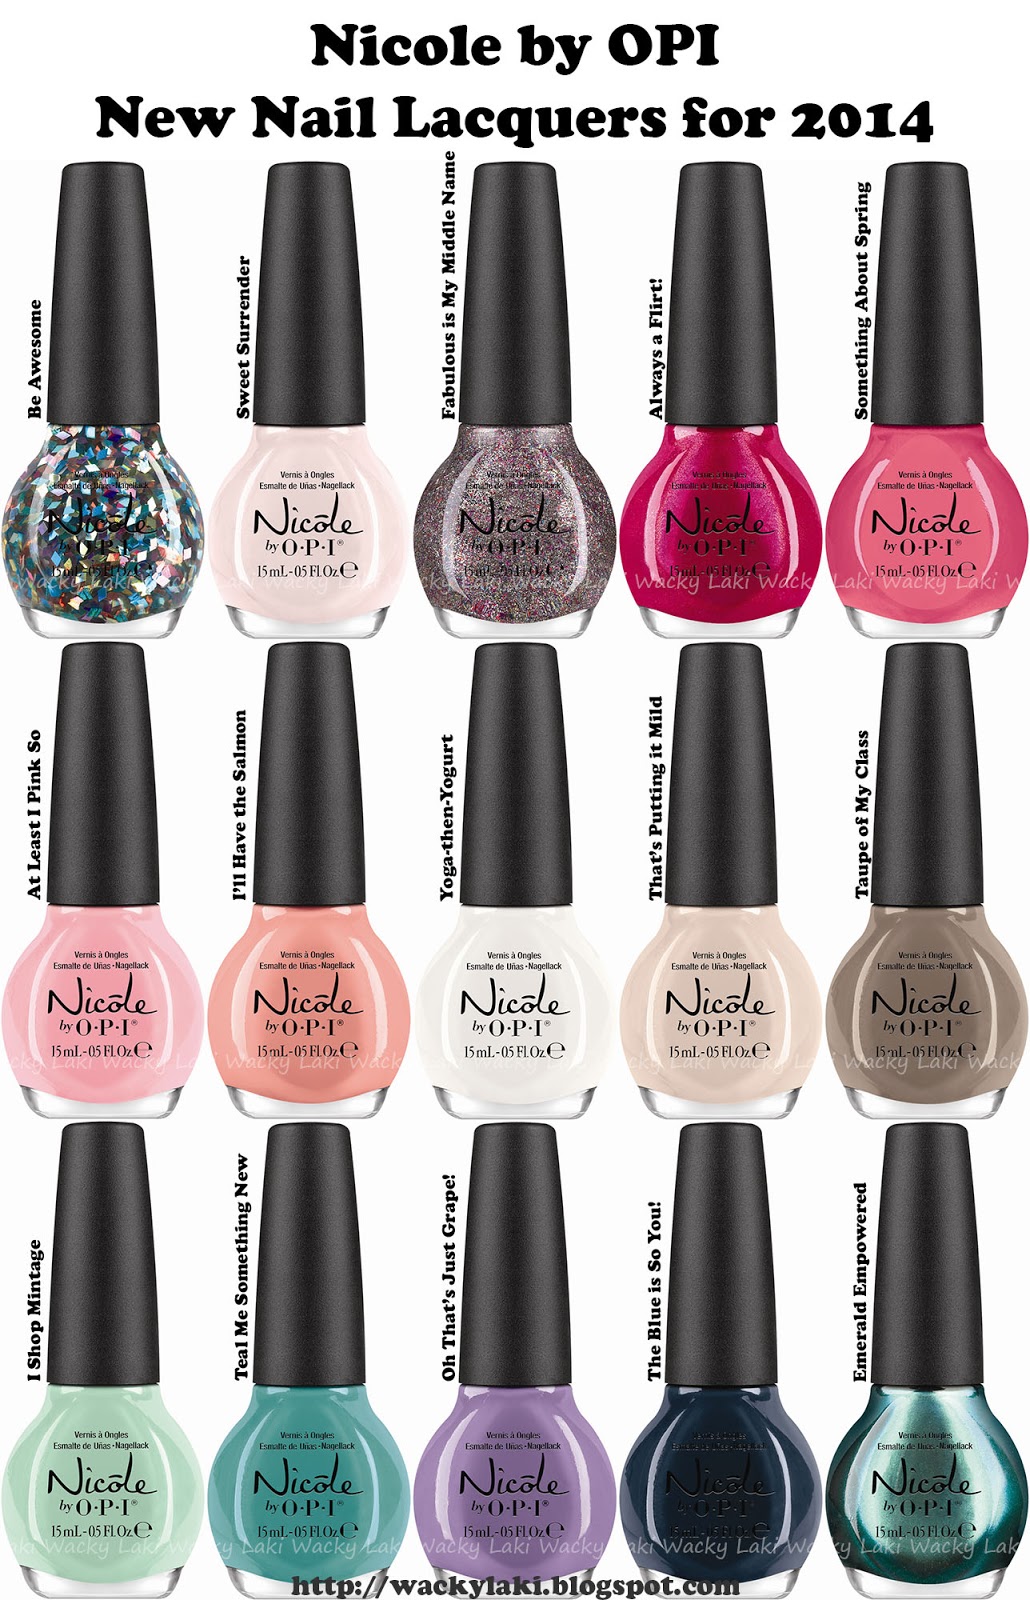 Wacky Laki Press Release Nicole By Opi New Nail Lacquers For 2014